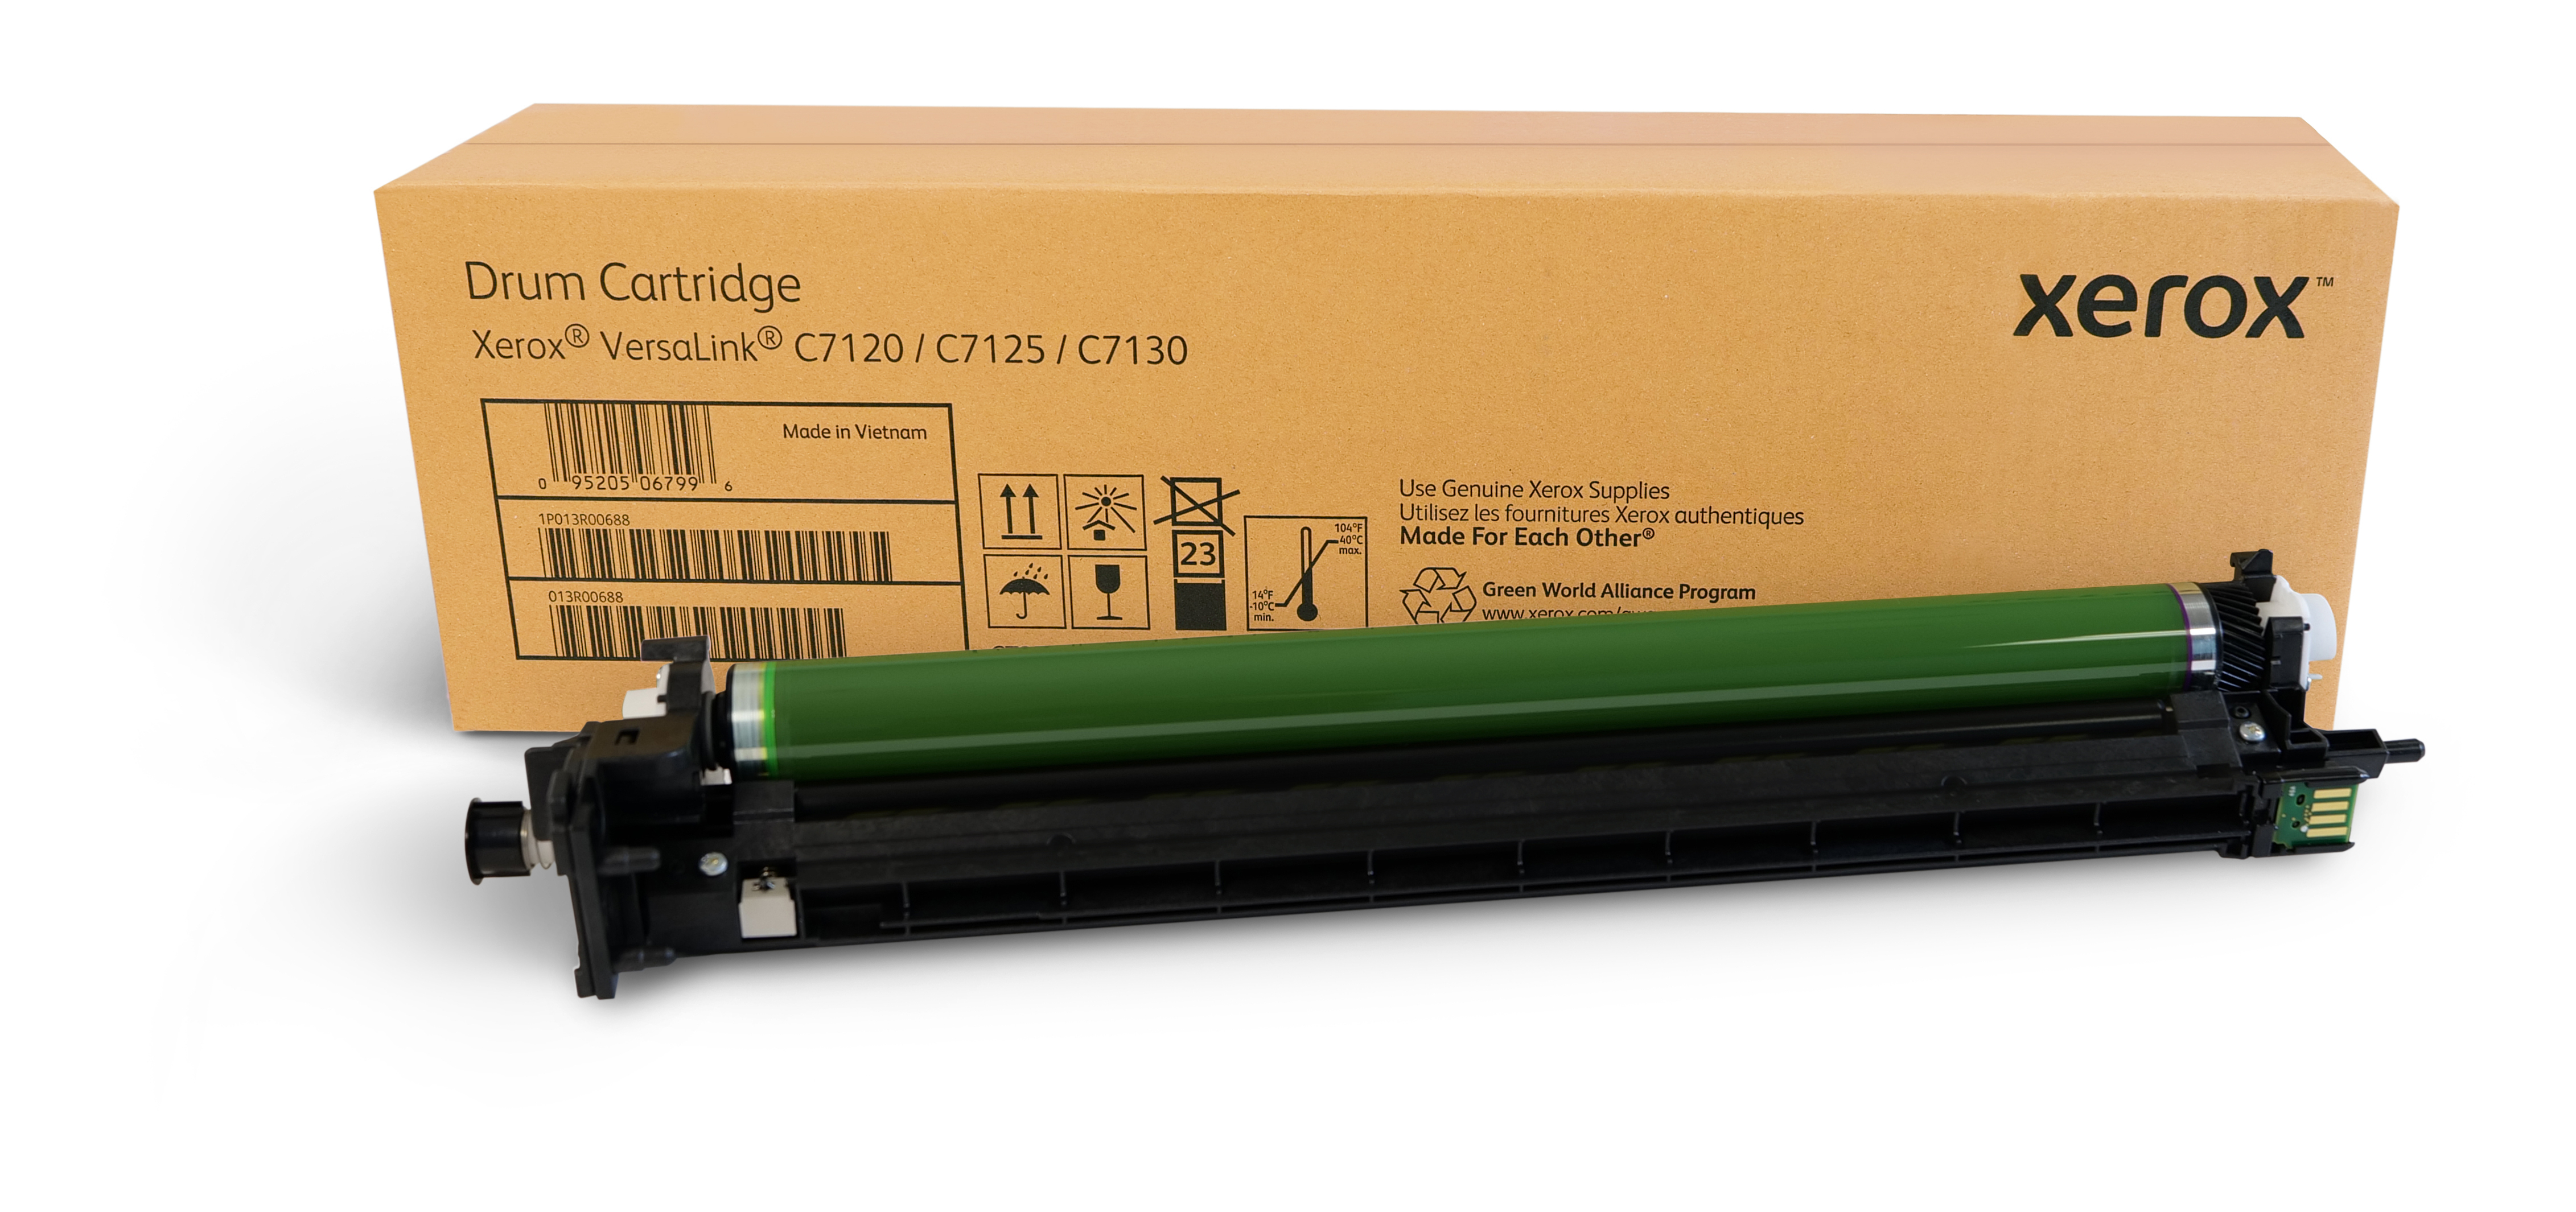 VersaLink C7100 Drum Cartridge (K 109,000 pages, CMY 87,000 pages)